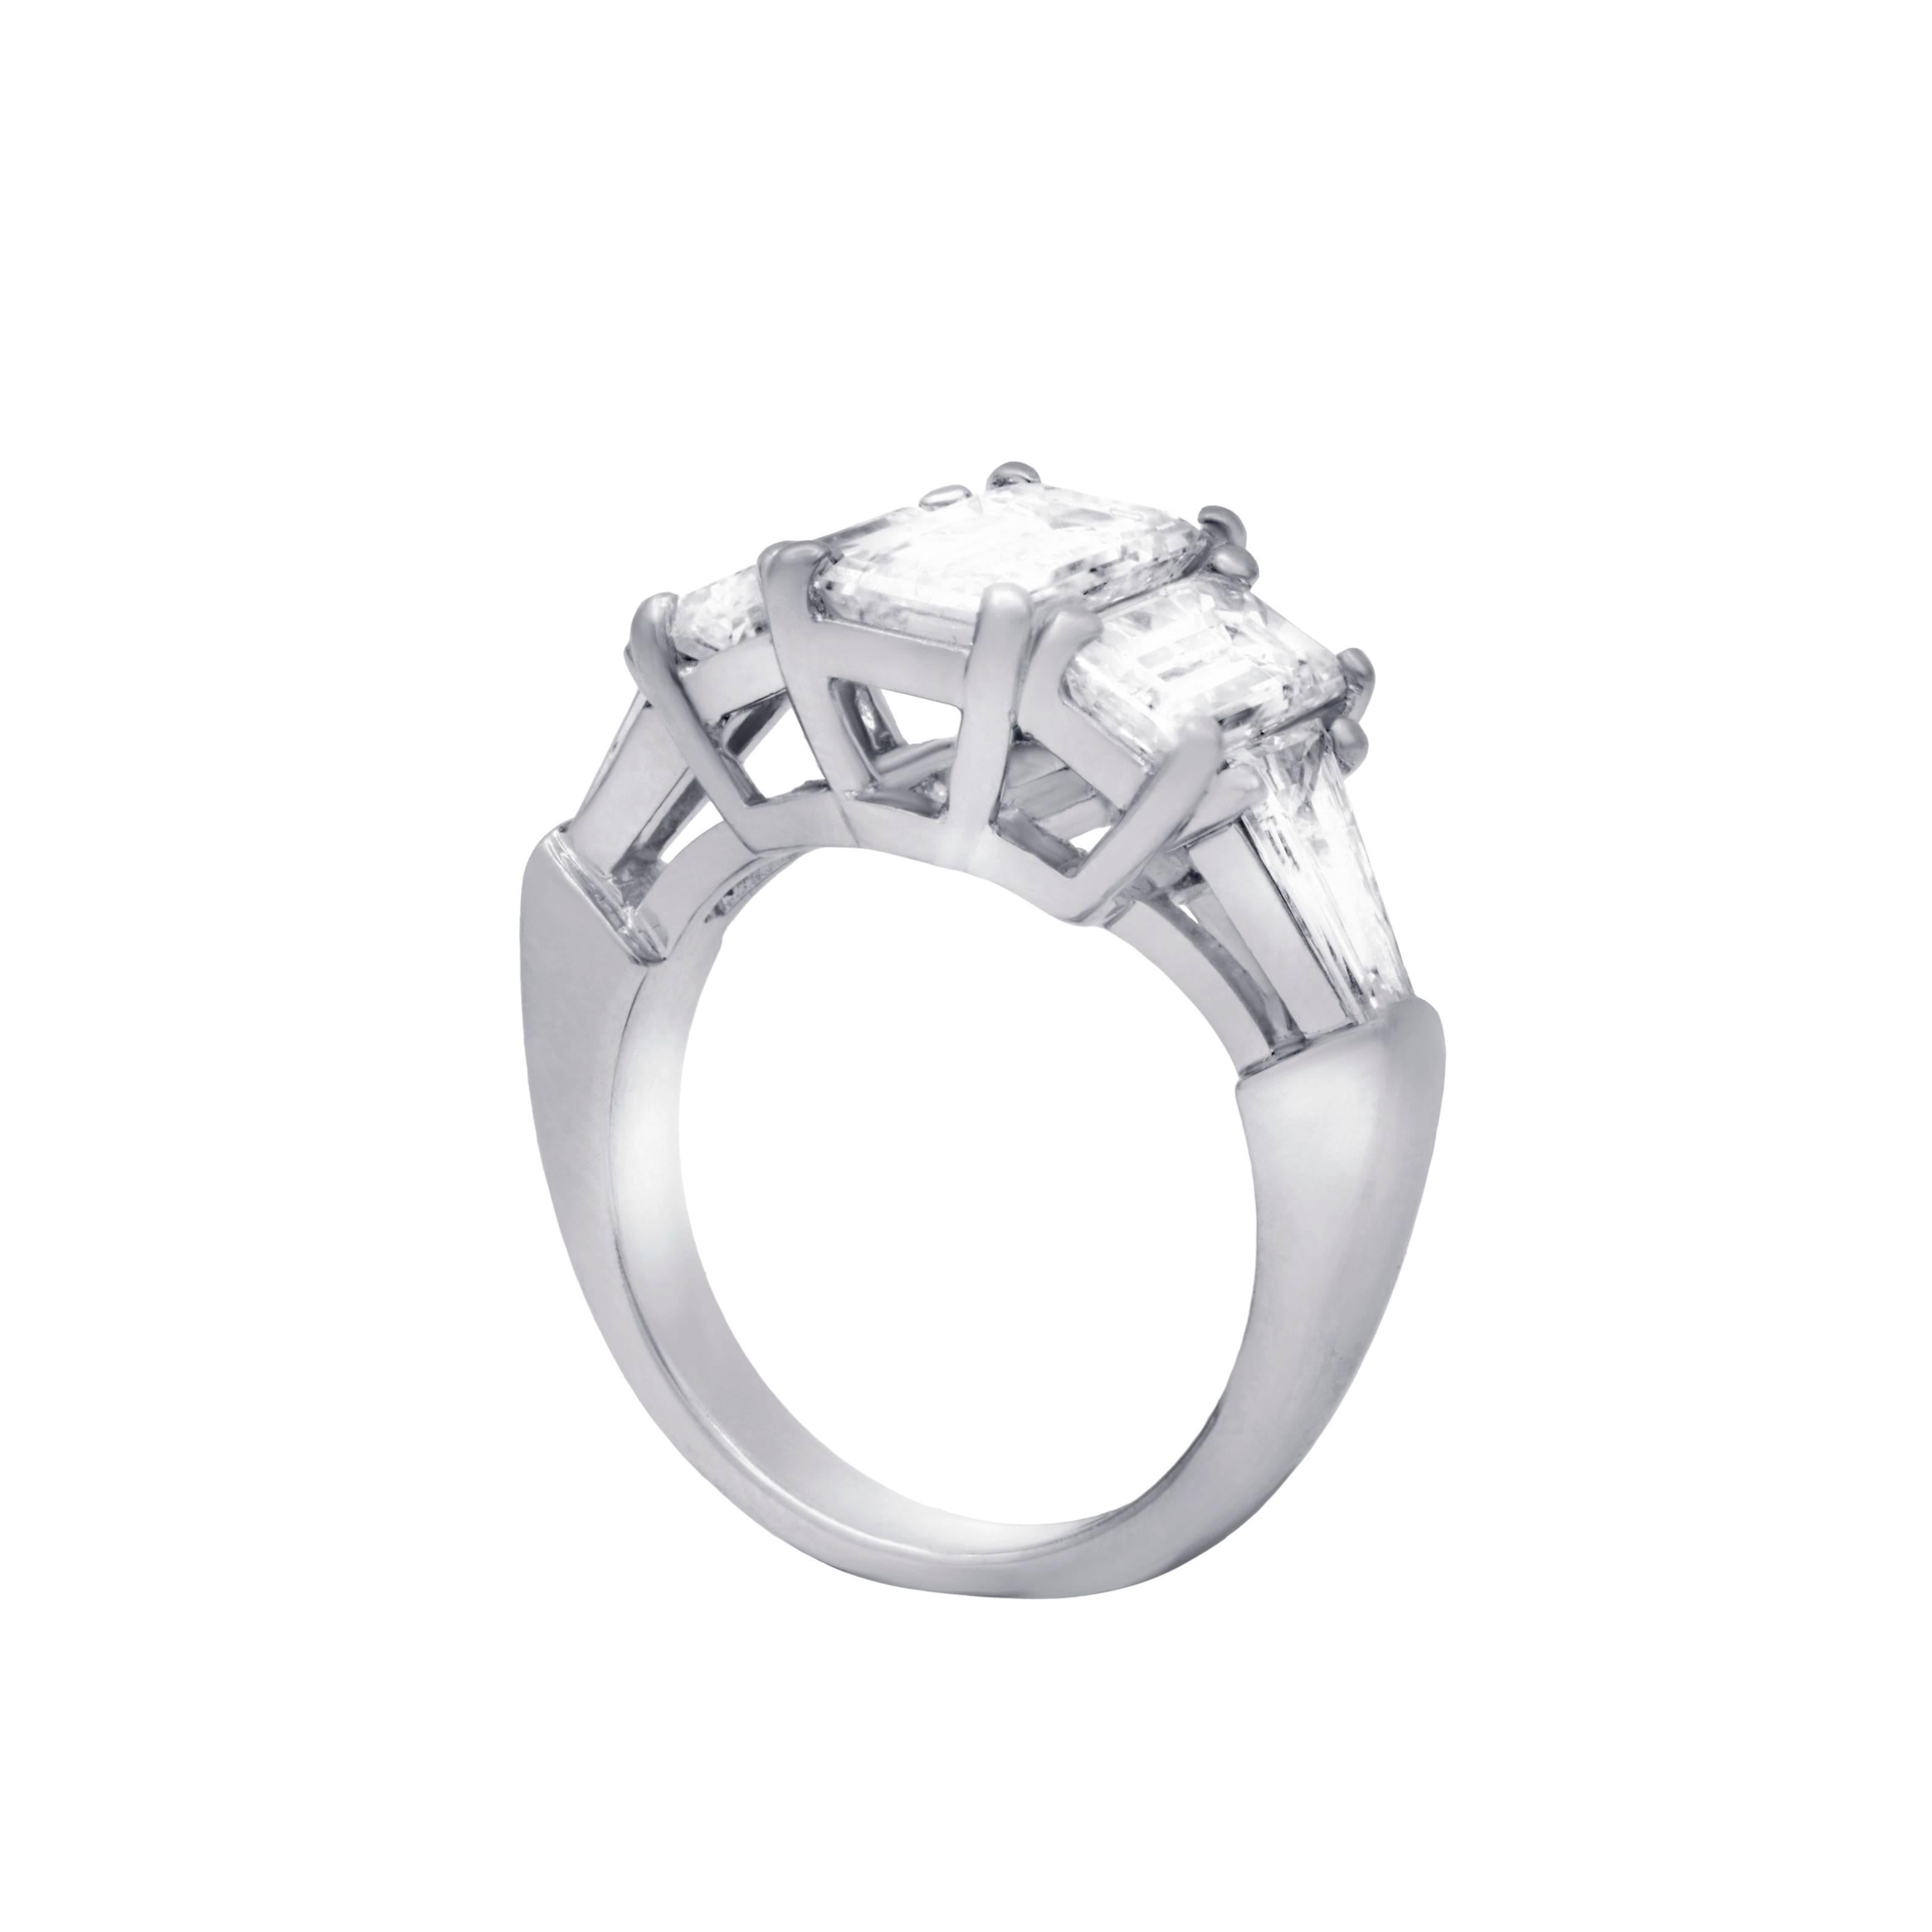 Platinum diamond engagement ring with  three certified emerald cut stones.The center EGL certified emerald cut features 2.03 cts J/VS1.
Side GIA certified diamonds features 1.01 ct I/VS1 and 1.00ct I/VS1.
Shank is adorned with additional two